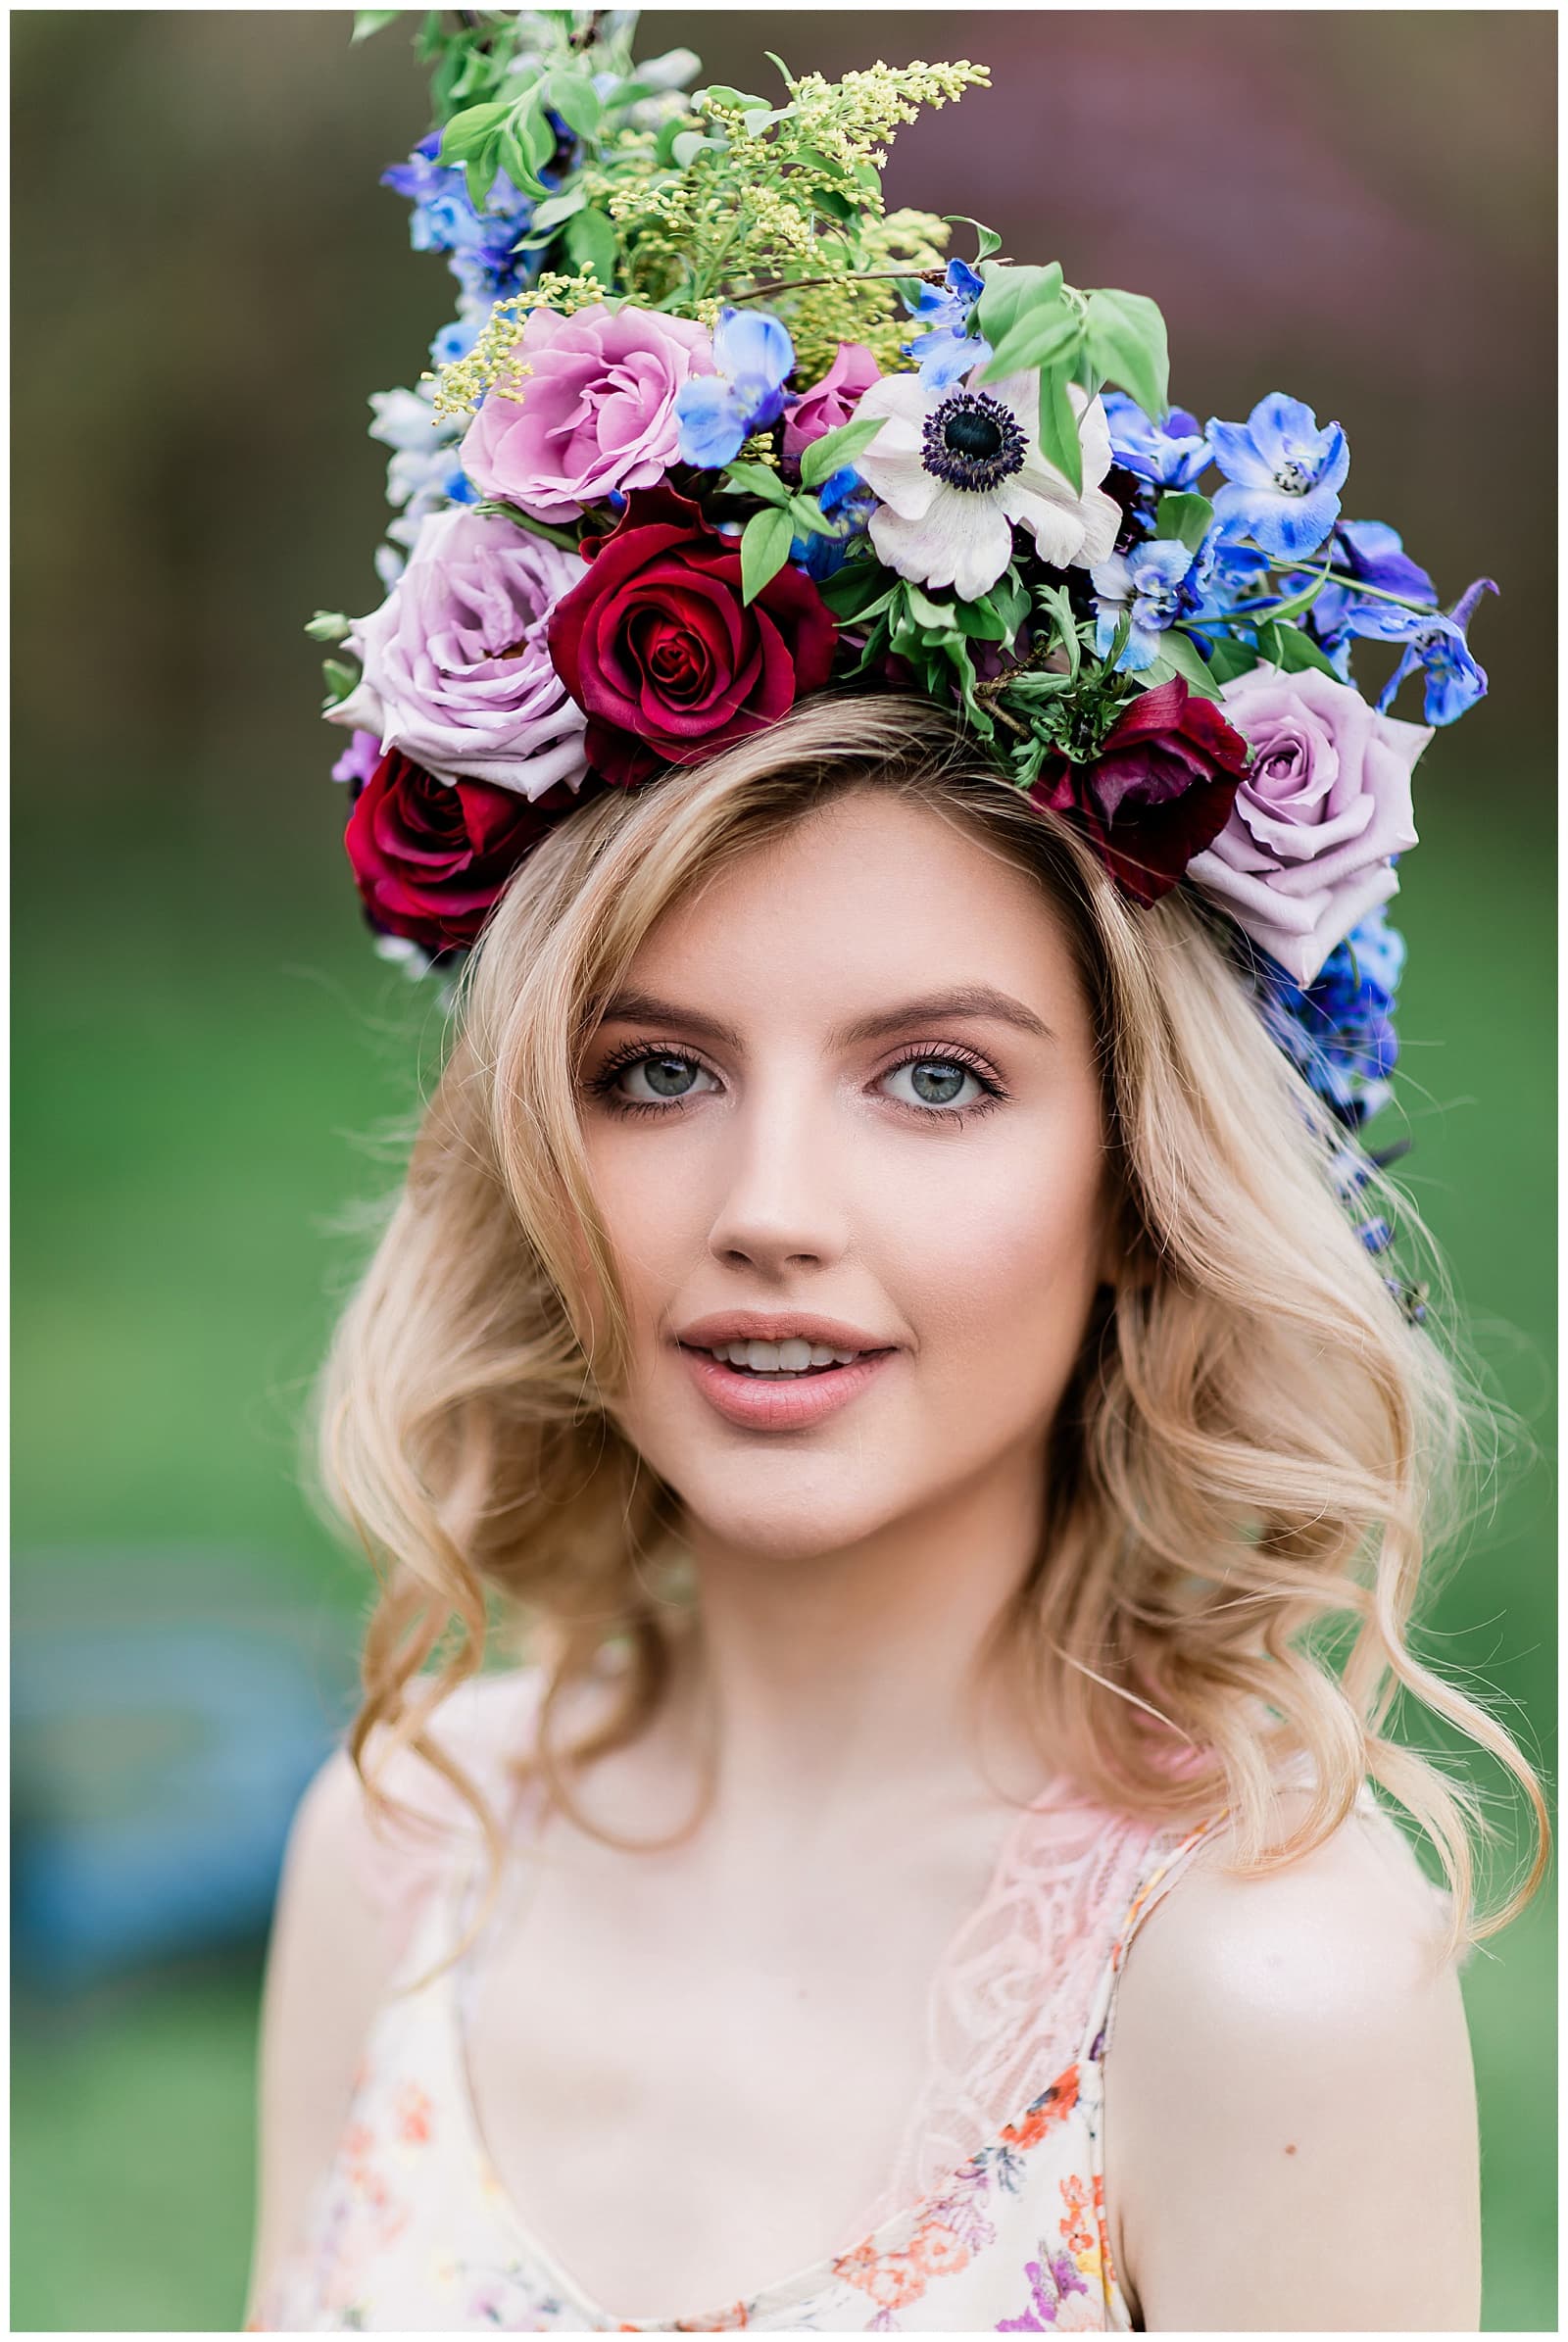 Danielle-Defayette-Photography-Blossom-and-Bloom-Design-Floral-Headpieces_0001.jpg